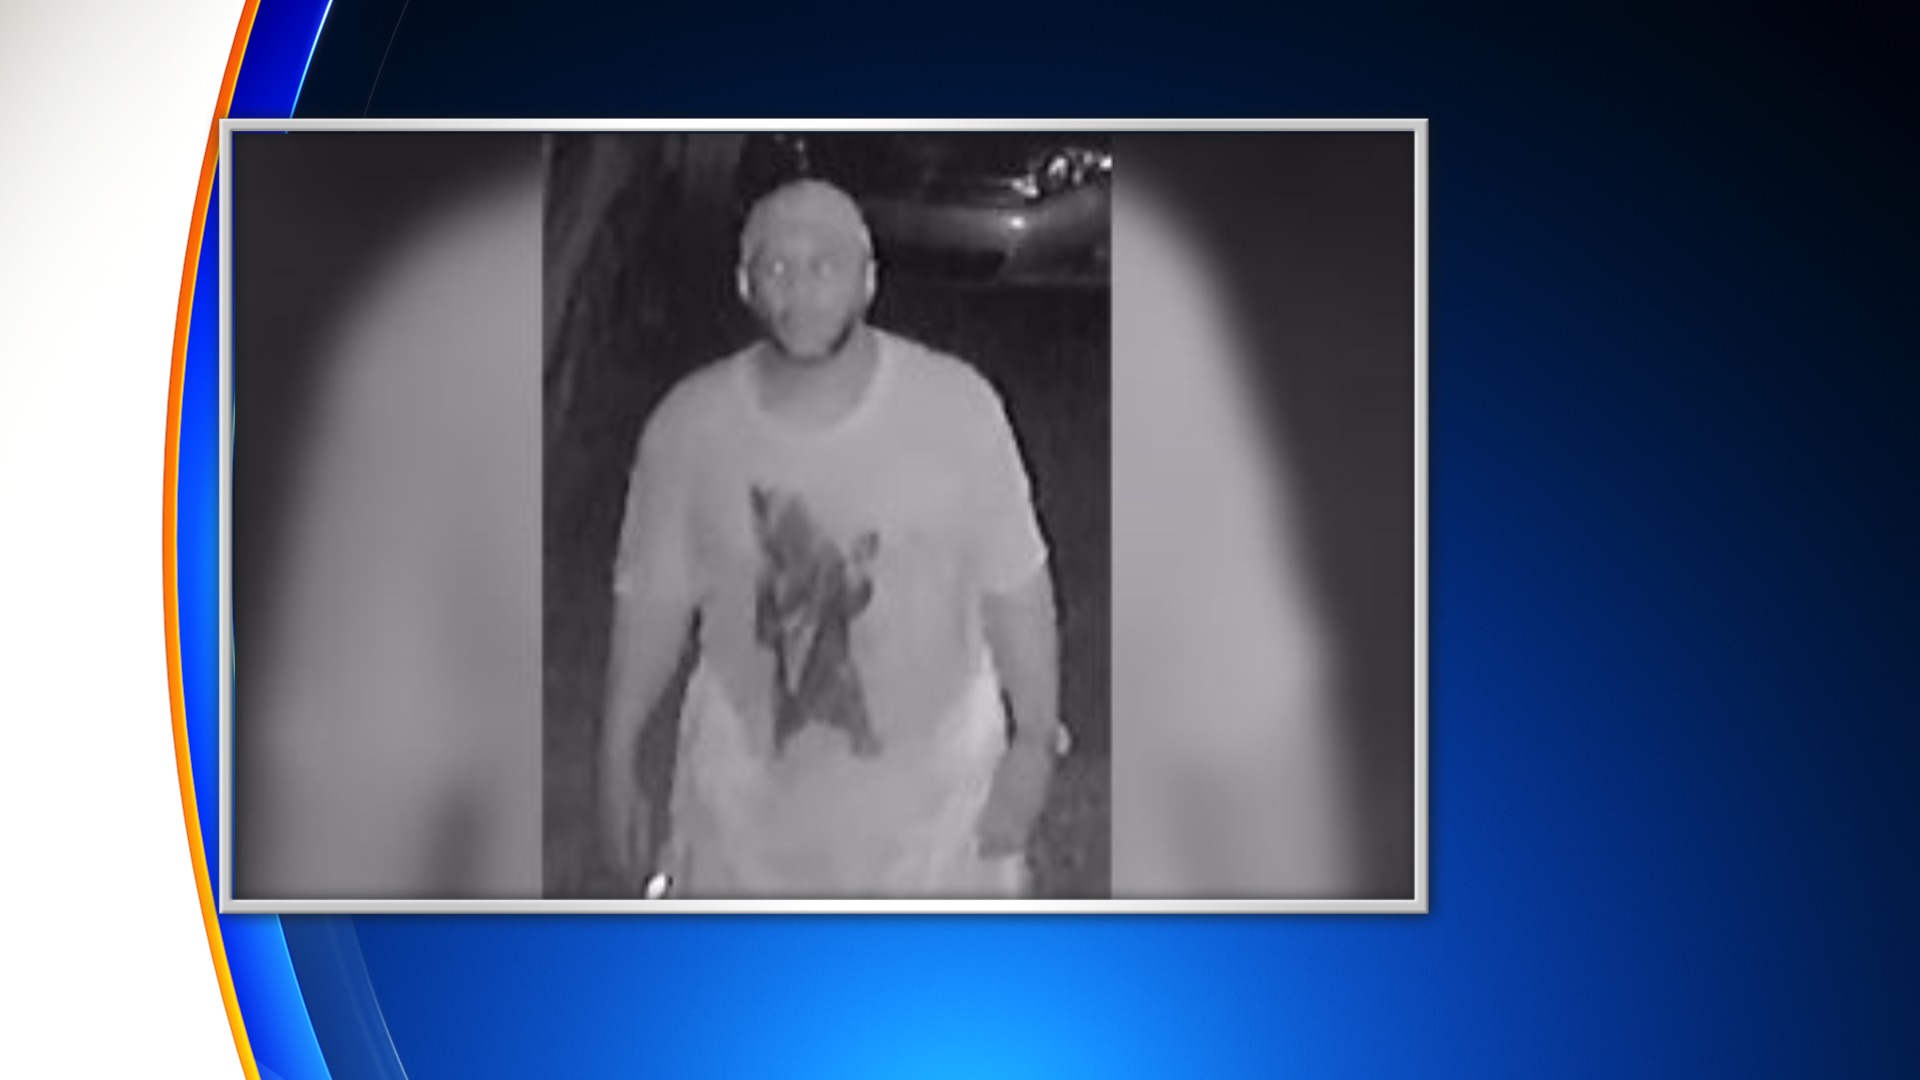 Man Wanted For 2 Home Burglaries In Center City